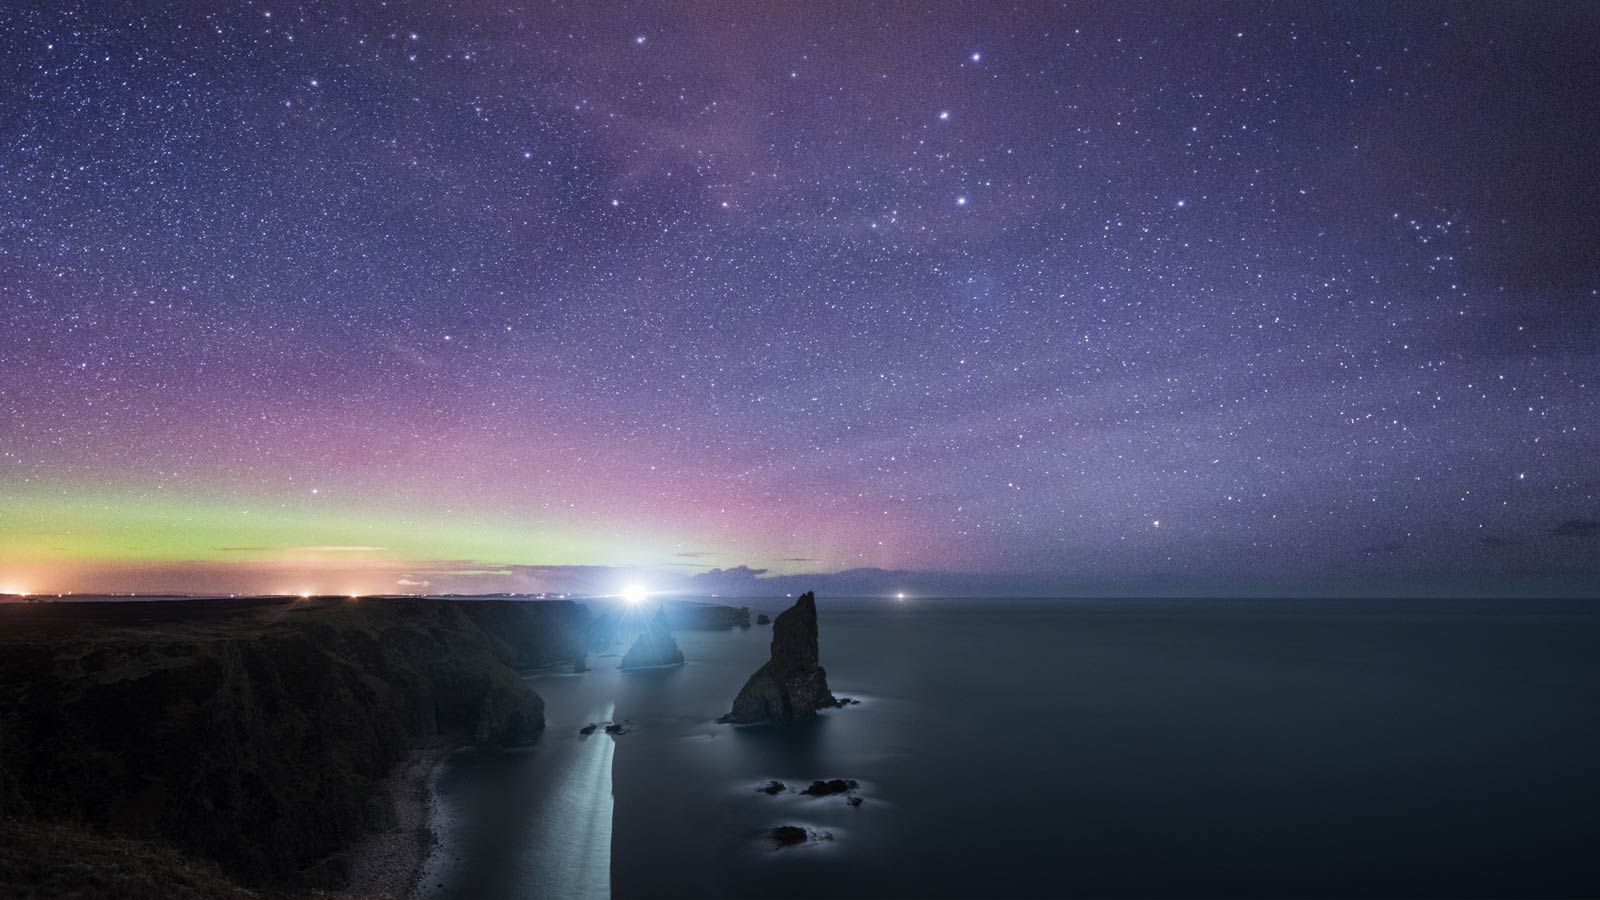 <p>As the northernmost area of Scotland, the Shetland Islands puts you closest to the Arctic Circle, meaning you’ll have a better chance of viewing the Aurora Borealis here. This relatively remote destination offers excellent viewing of the lights from the end of autumn through early spring. </p>